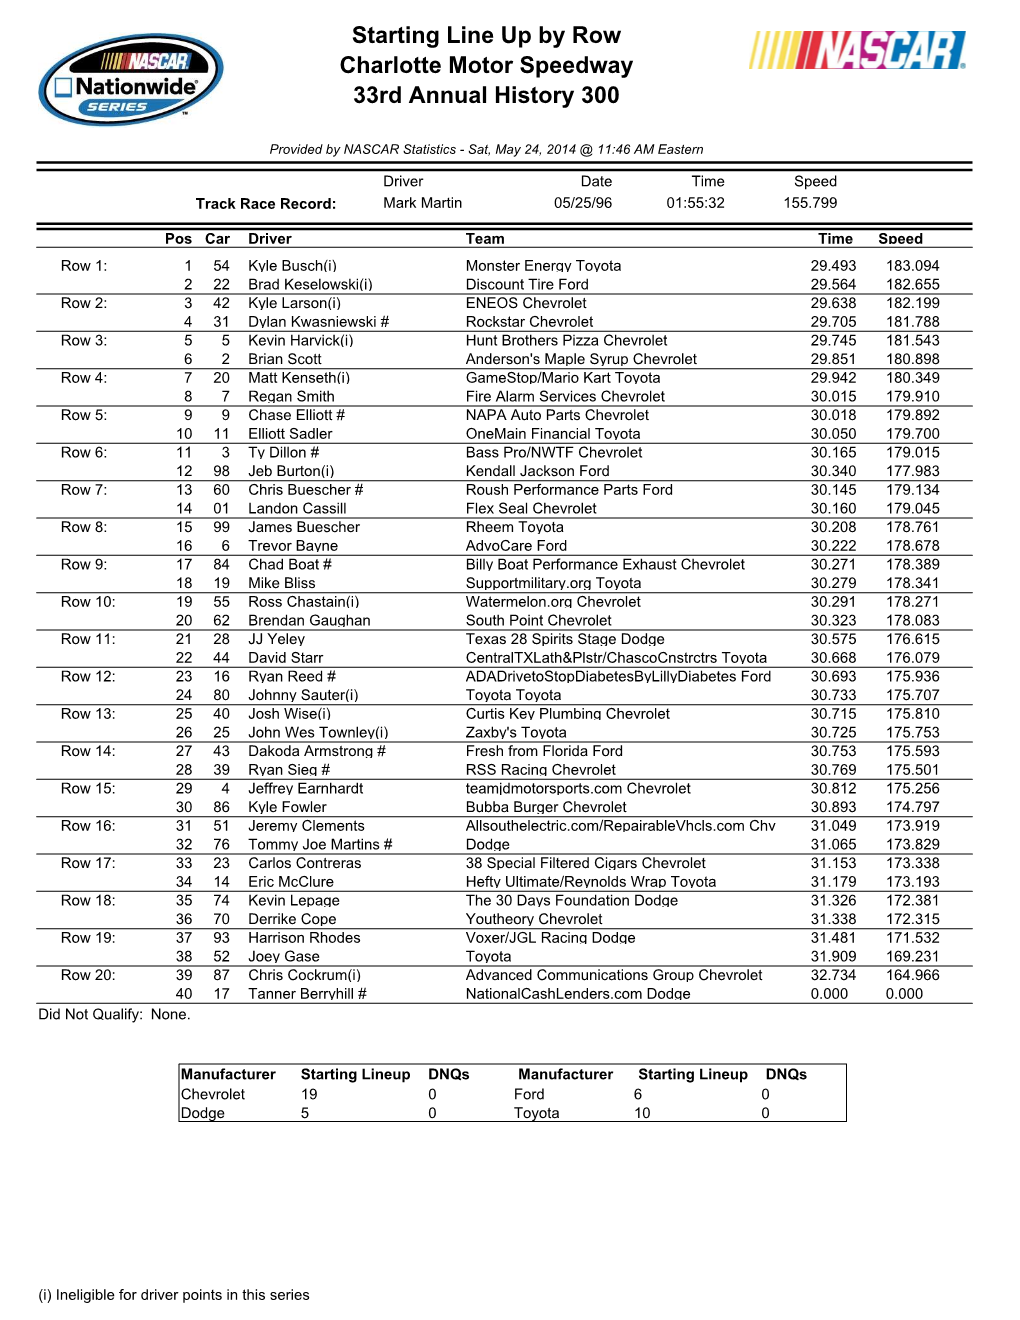 Starting Line up by Row Charlotte Motor Speedway 33Rd Annual History 300